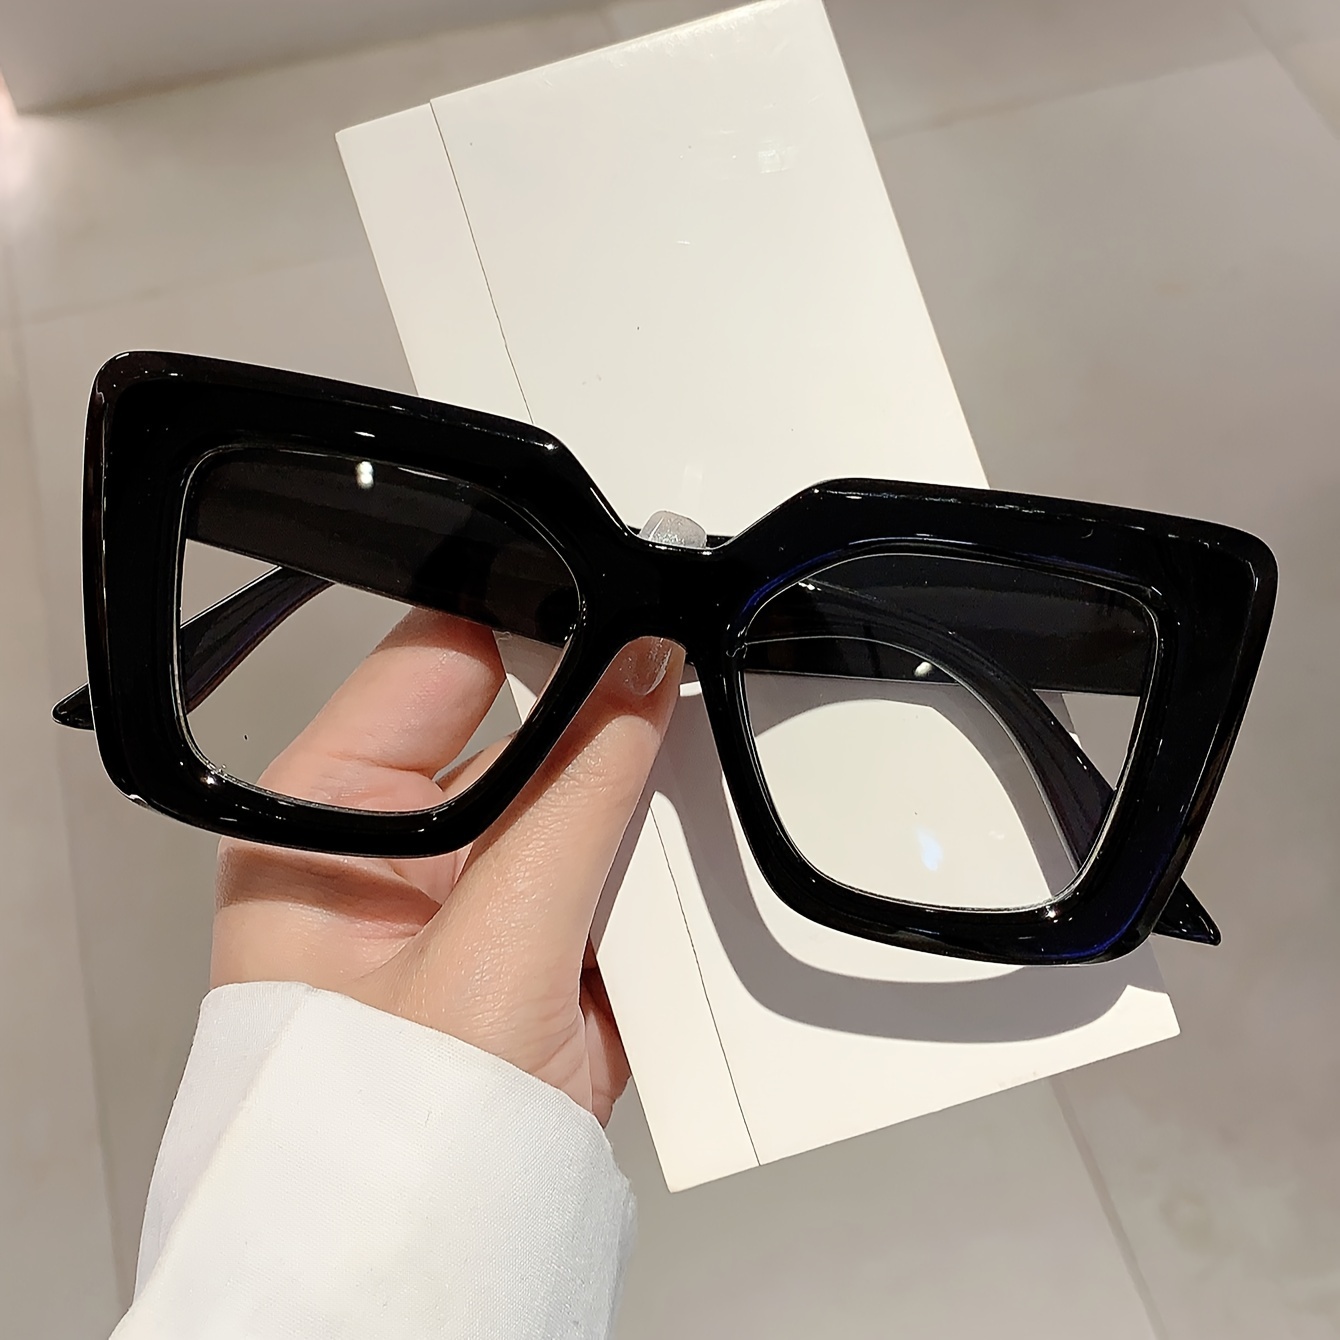 

Vintage Oversize Eyeglasses Jelly Color Fashion Decorative Glasses Outdoor For Women Spectacles